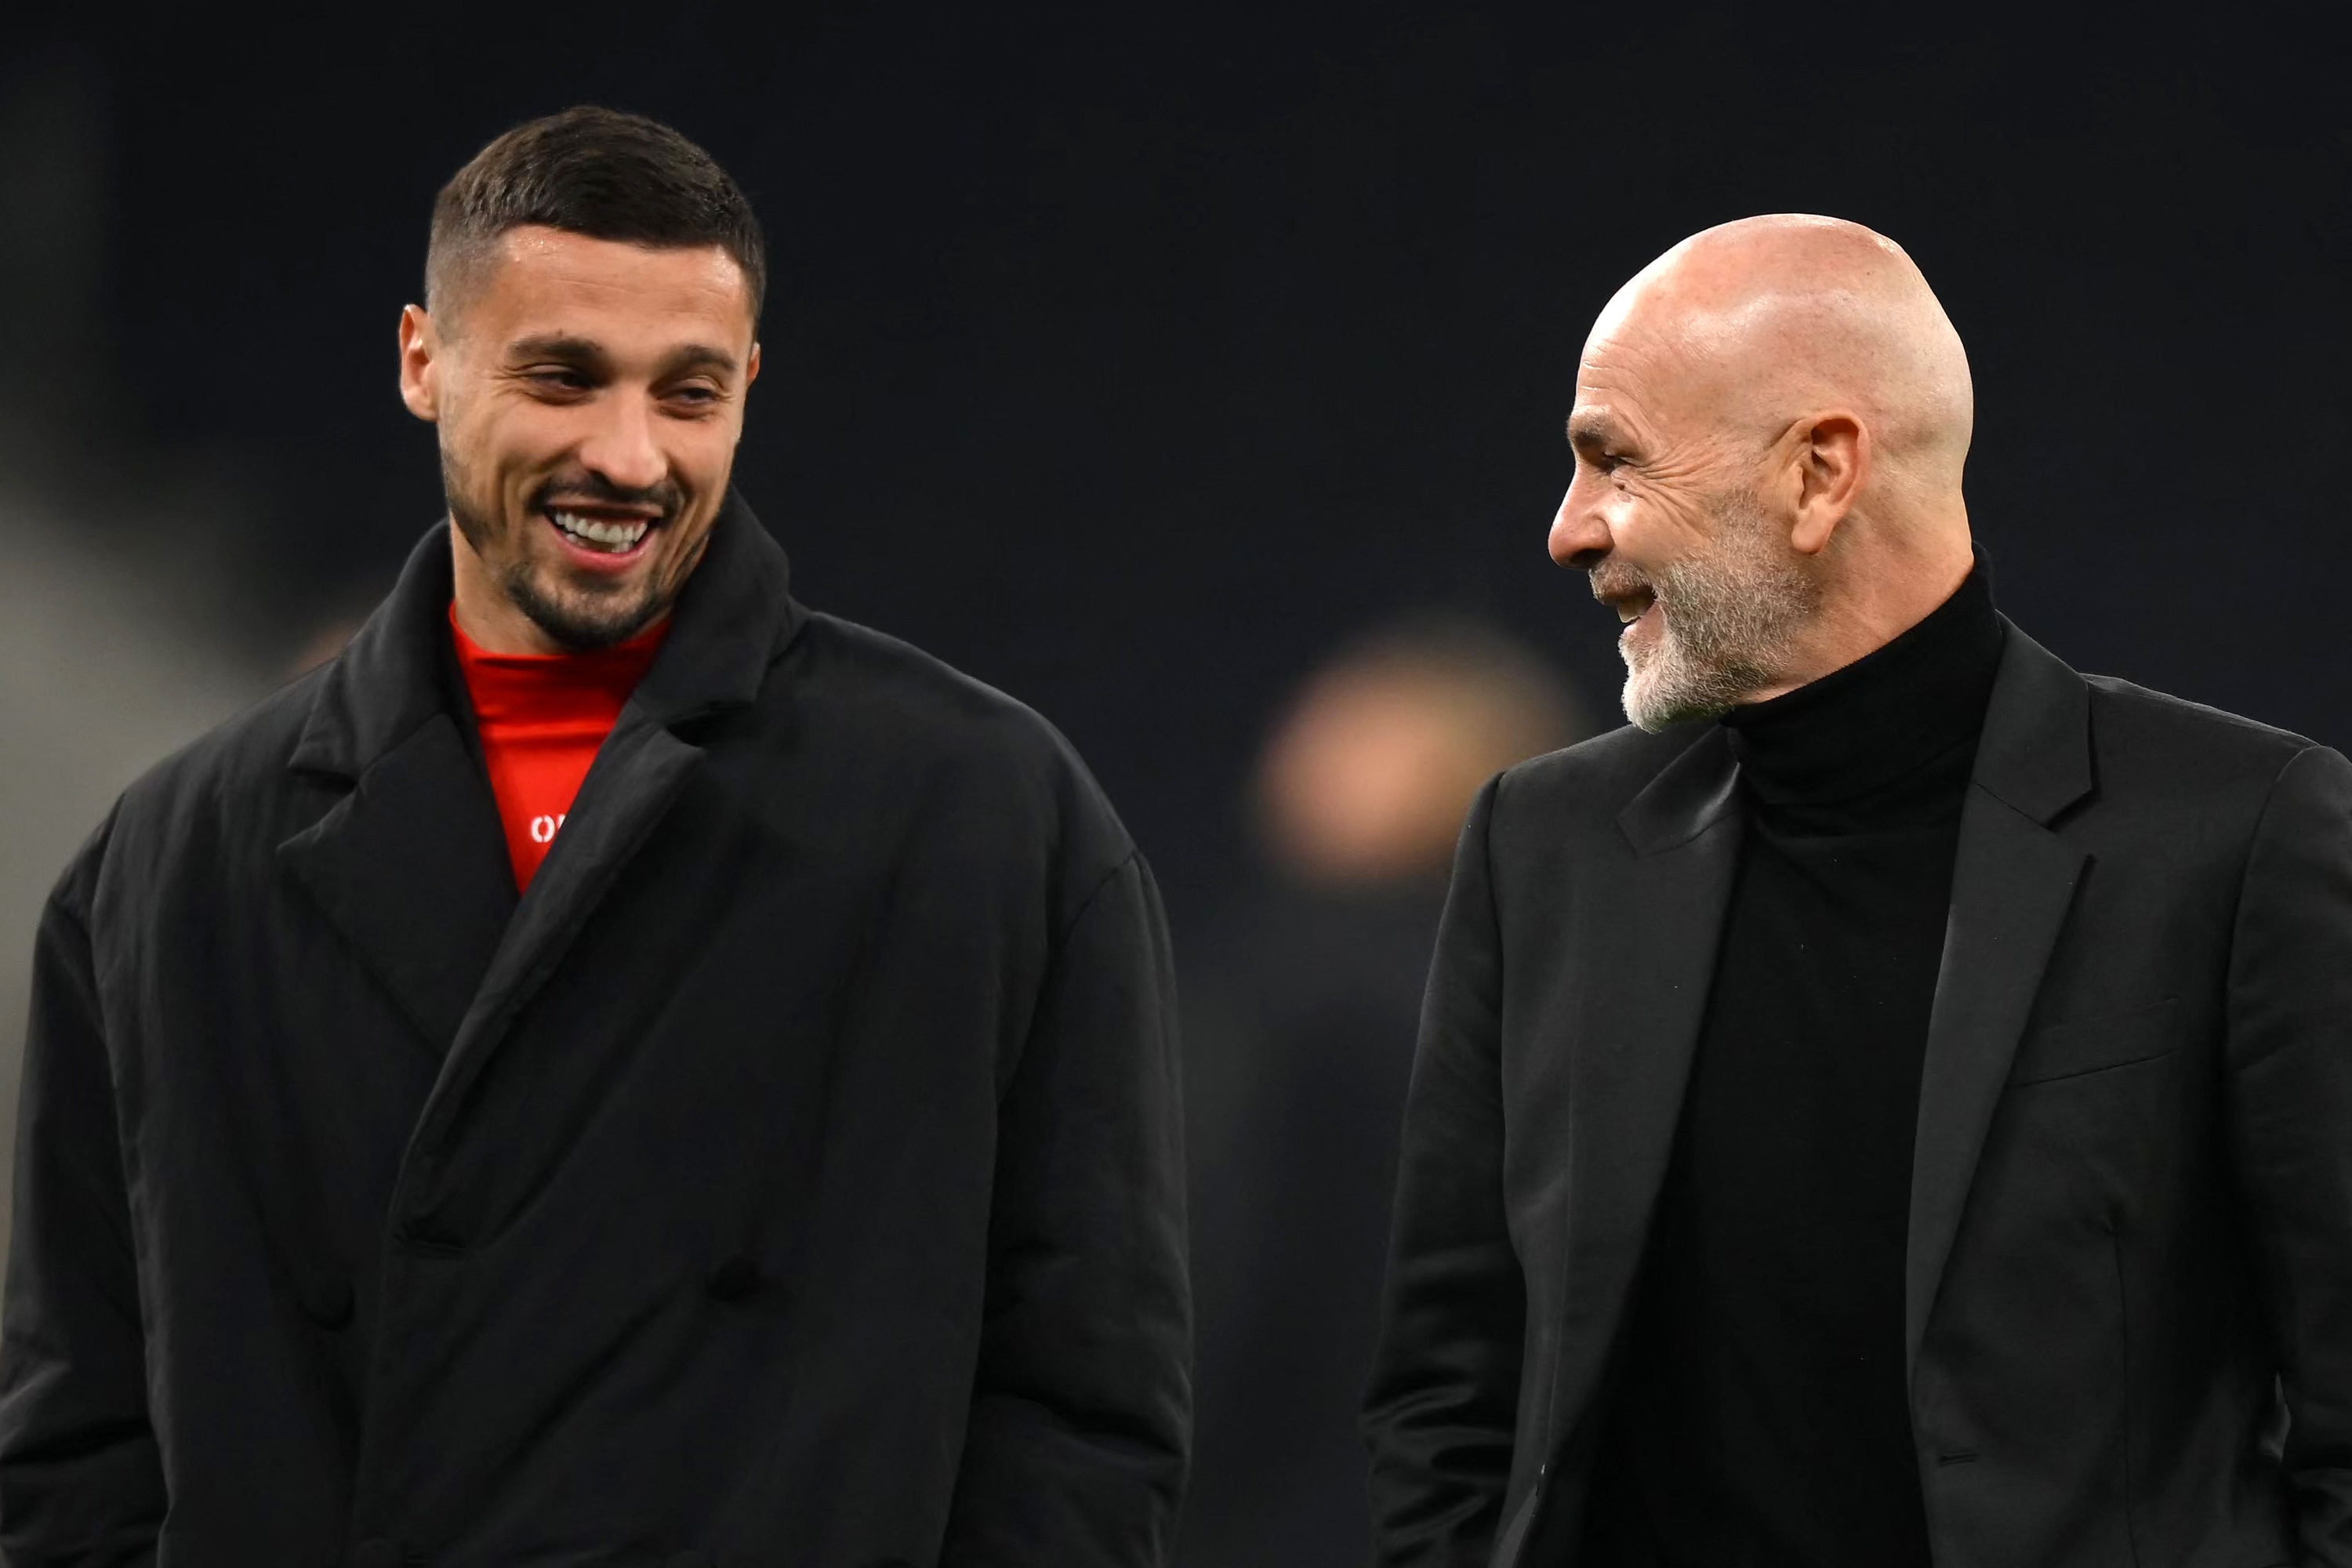 AC Milan's Bosnian midfielder Rade Krunic (L) talks with AC Milan's Italian coach Stefano Pioli as they walk on the pitch at Tottenham Hotspur Stadium in London, on March 7, 2023, on the eve of their UEFA Champions League round of 16 second-leg football match against AC Milan. (Photo by Daniel LEAL / AFP)